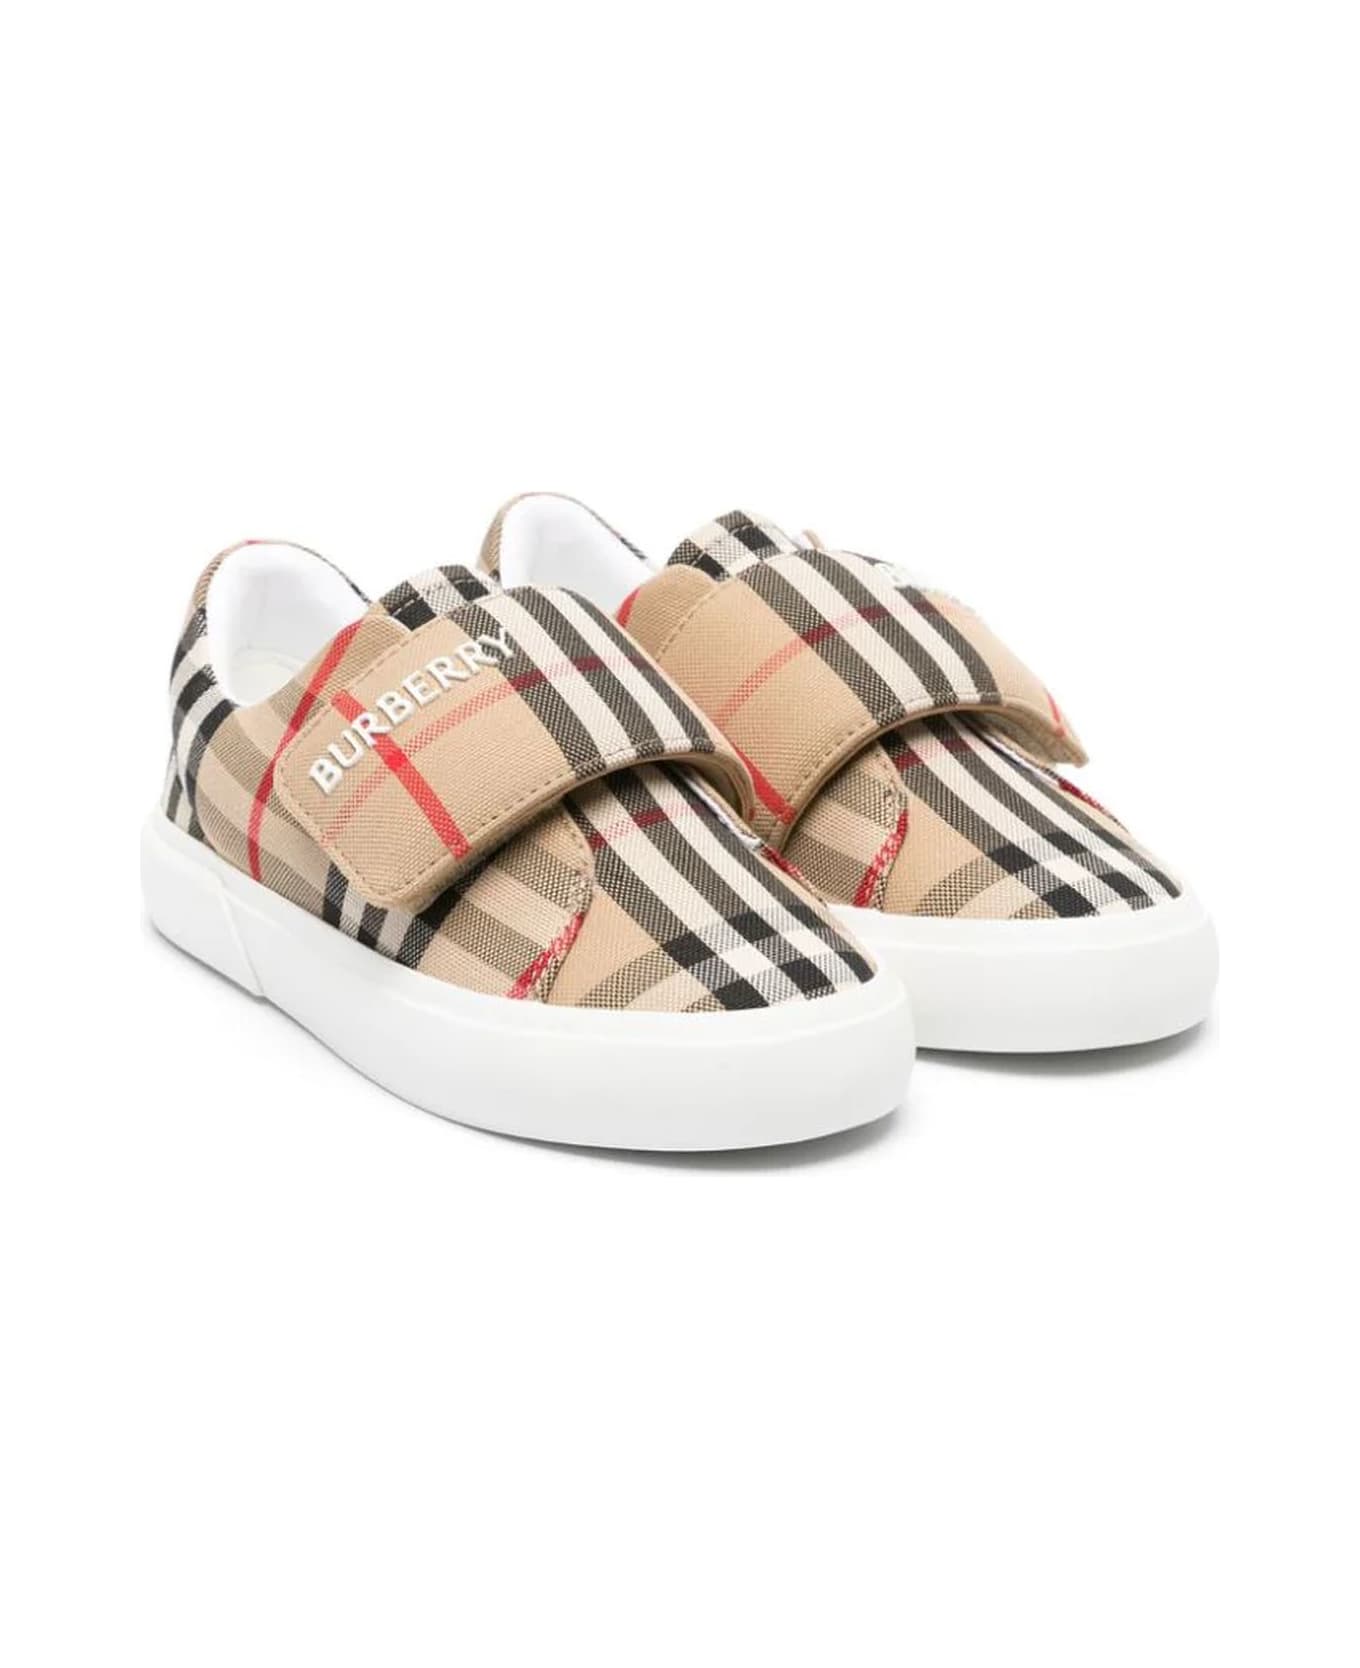 Burberry Beige Touch-strap Trainers - Beige